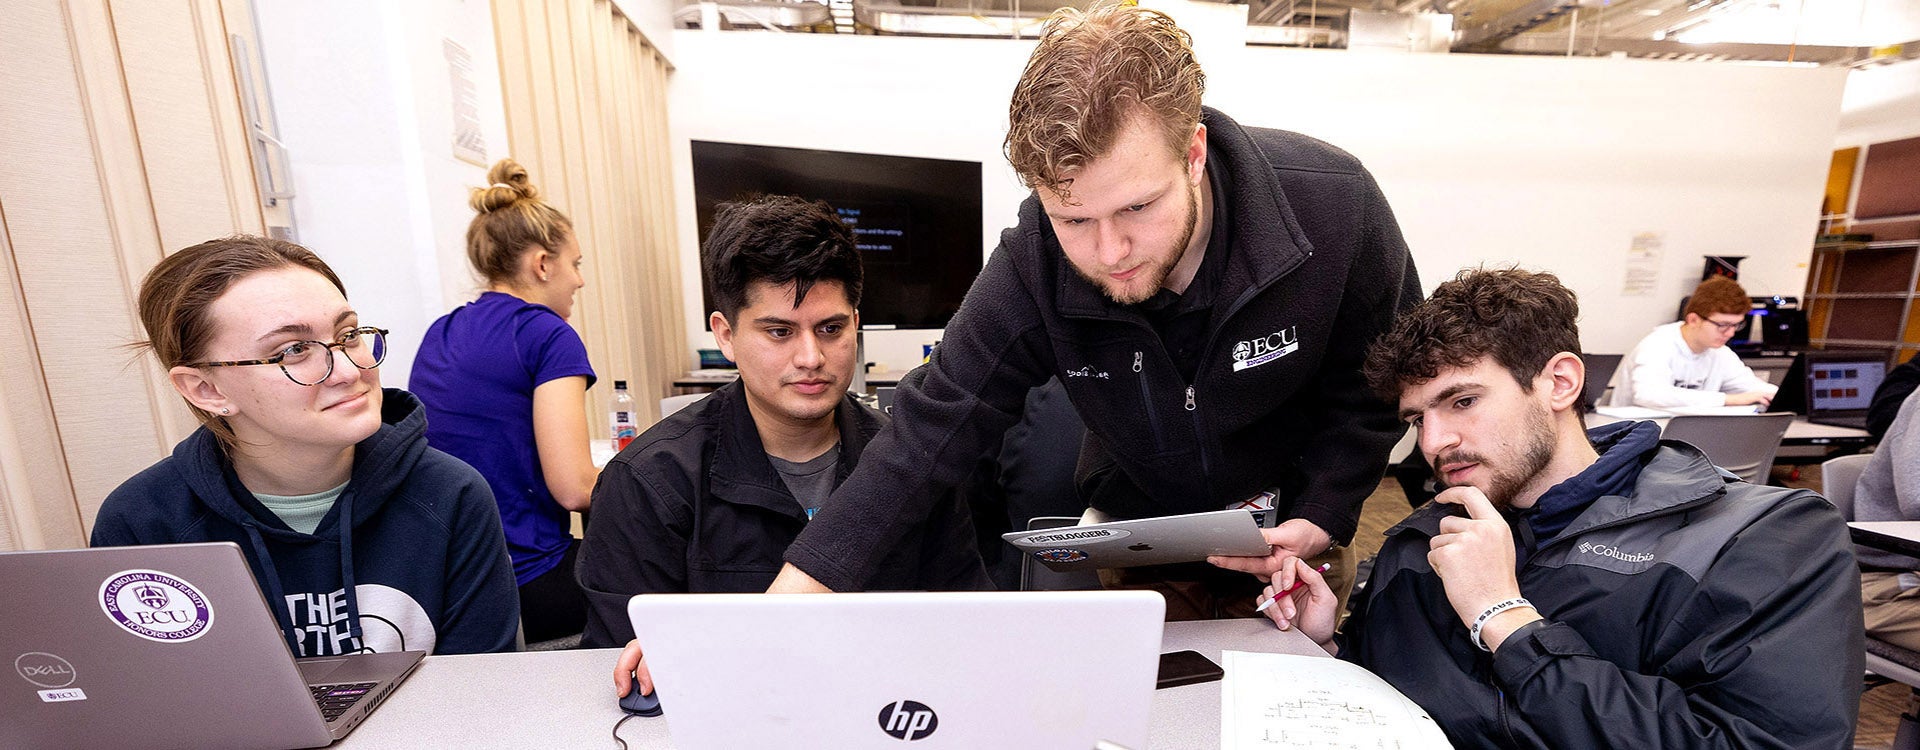 Engineering student Colin Foley, center, works  as a teacher's assistant in an introductory engineering class. Foley, a sophomore, interned with Richard Childress Racing, one of NASCAR's most successful teams. (Photo by Rhett Butler)